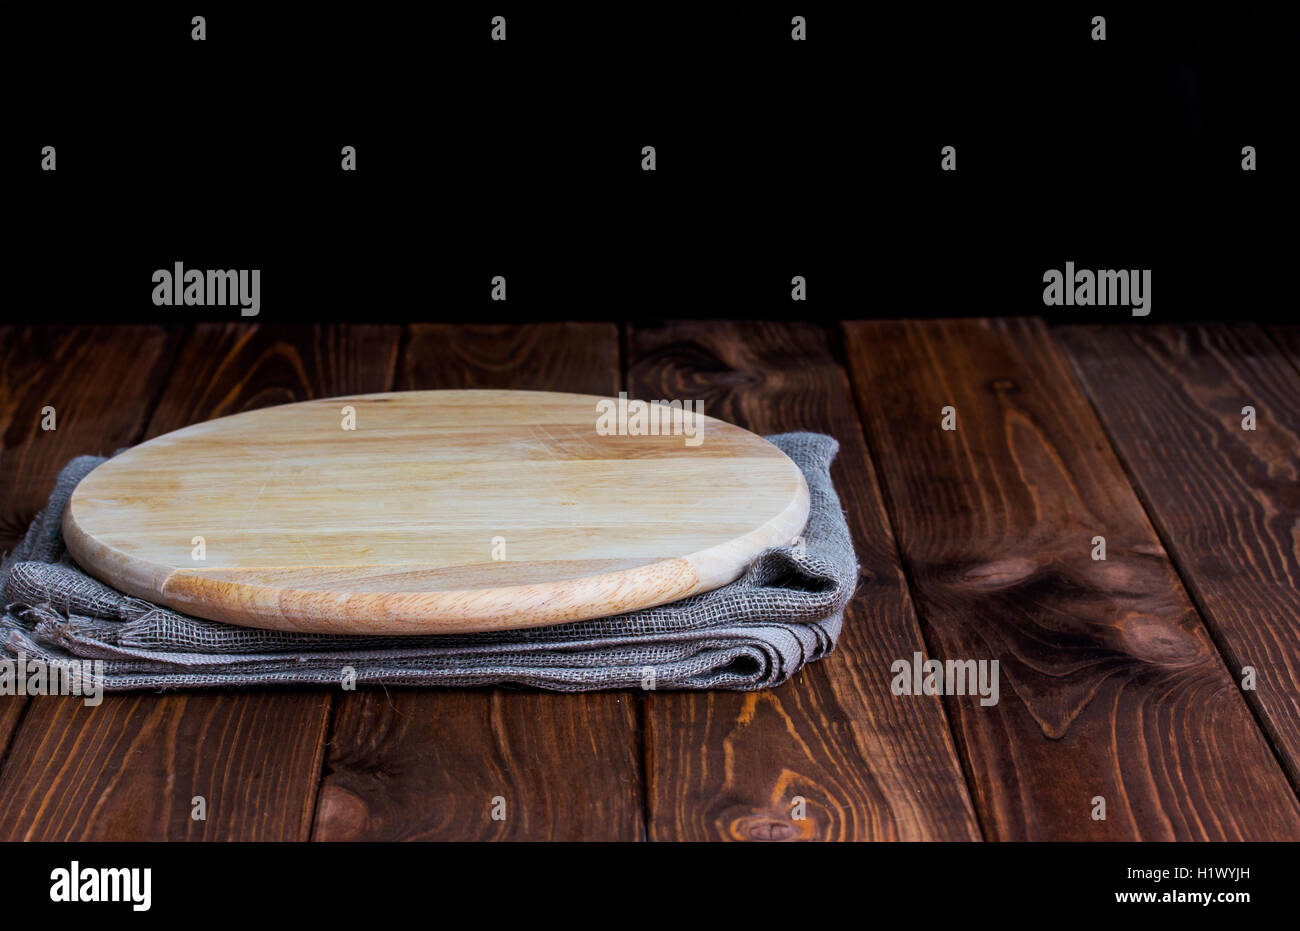 Table with round cutting board for product montage Stock Photo